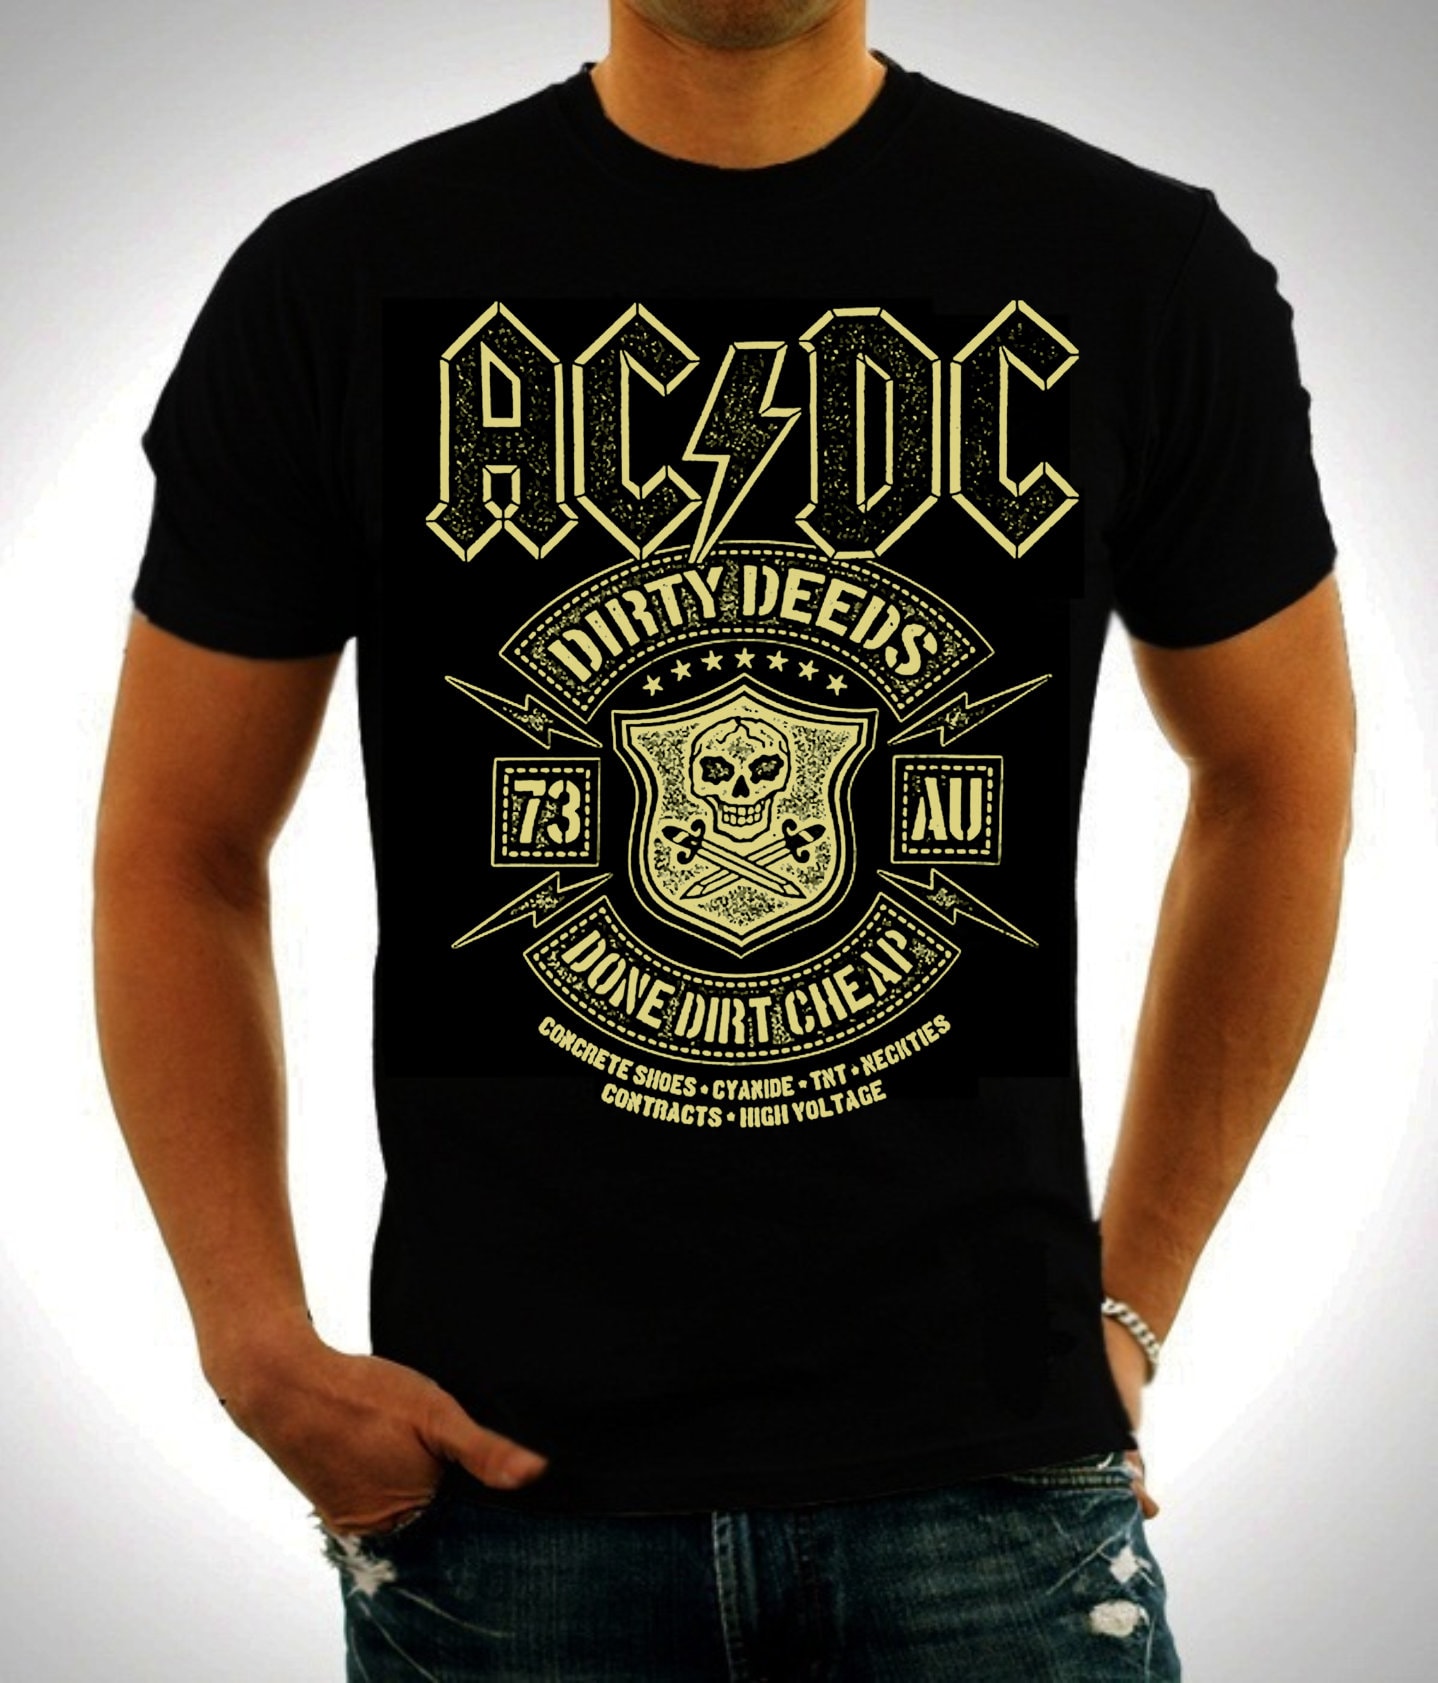 ACDC Men's Jailbreak T-Shirt at Tractor Supply Co.